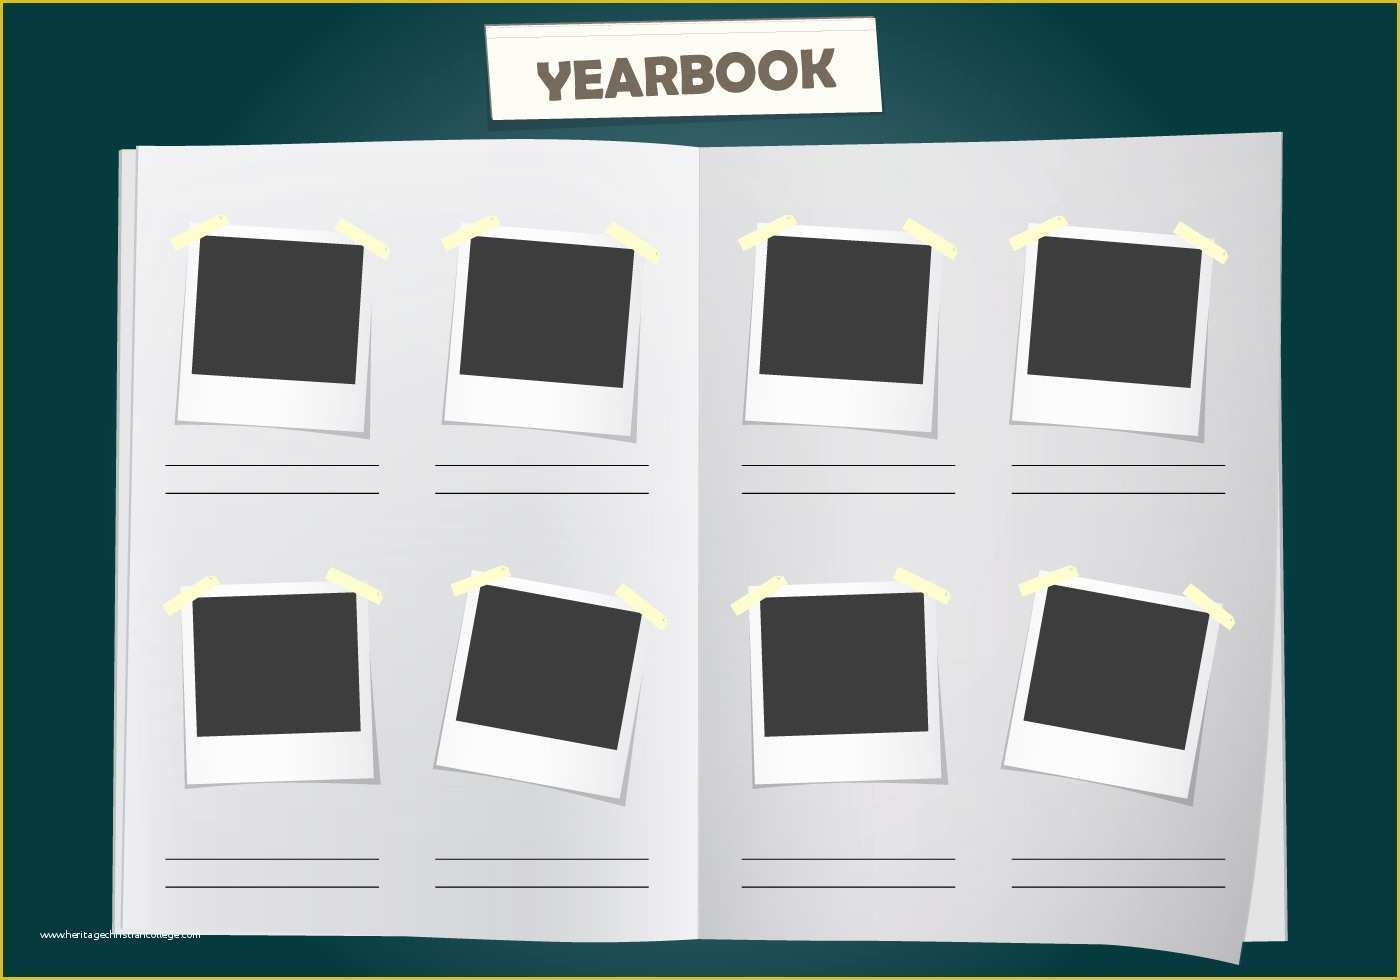 free-indesign-yearbook-template-download-of-yearbook-page-template